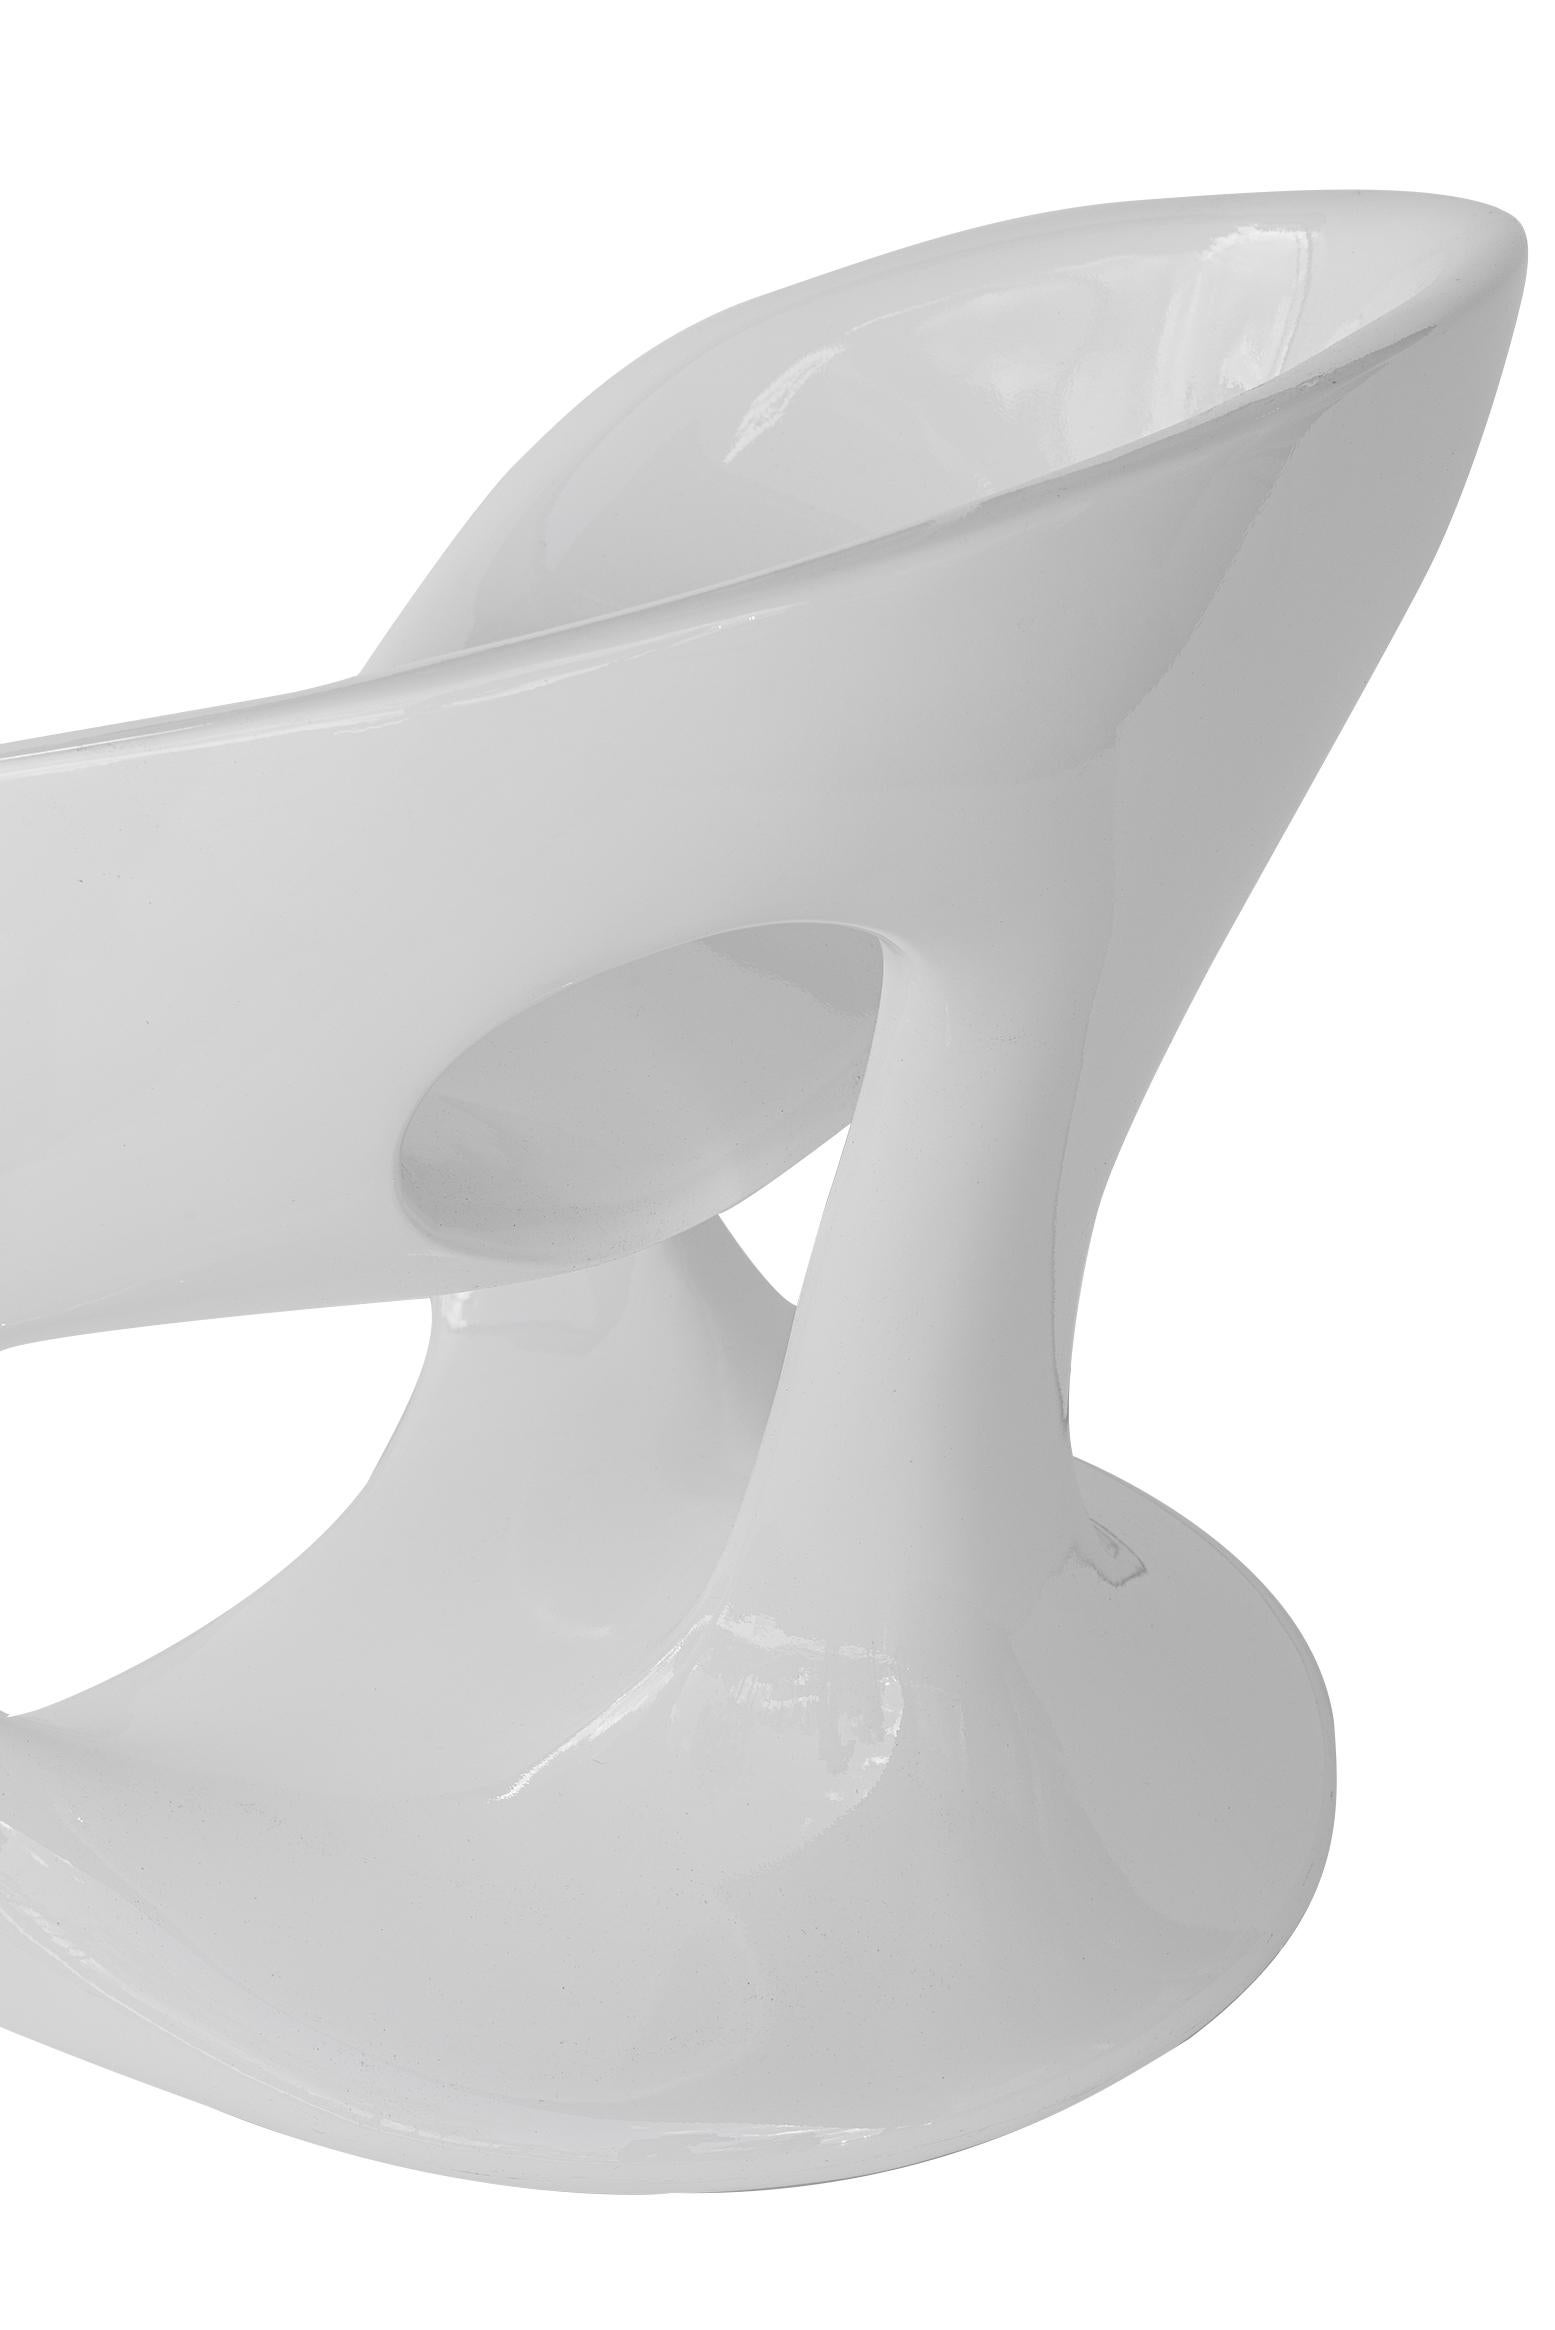 Kundalini Hara White Lacquered Fiberglass Outdoor Sculptural Chairs by Gurioli In Good Condition In North Miami, FL